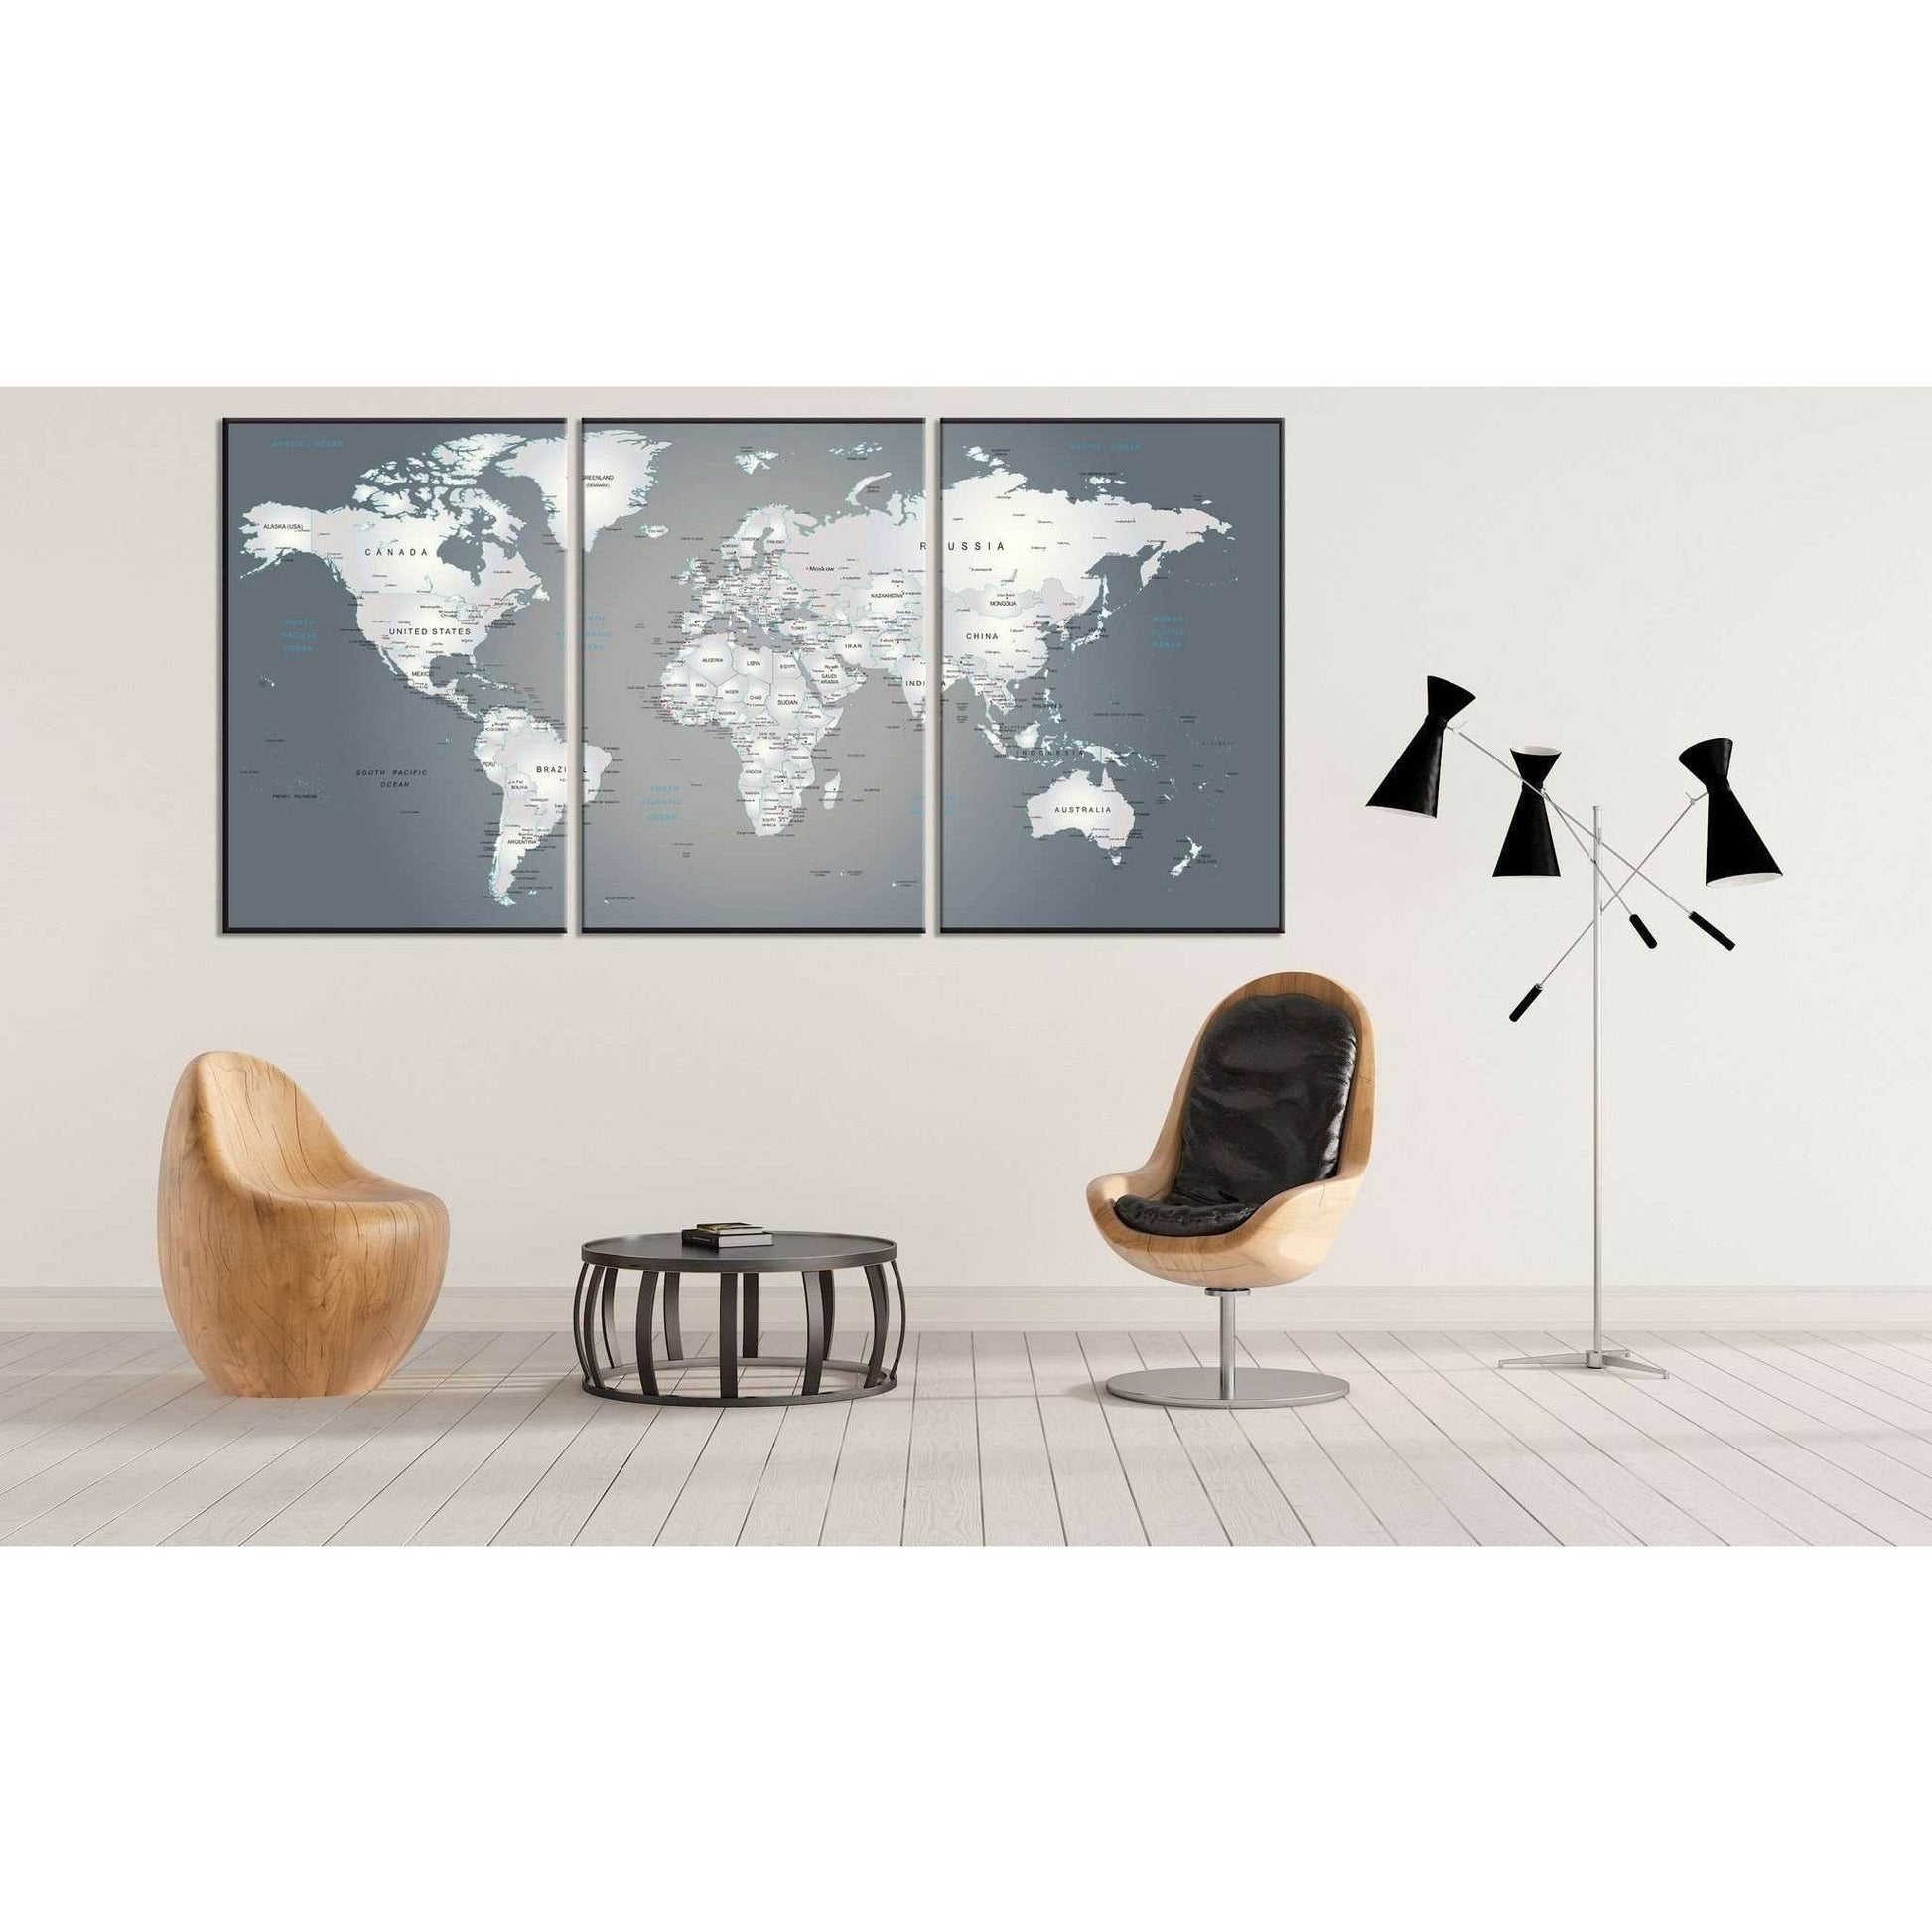 Metallic Large World Map for Office Wall DecorDecorate your walls with a stunning Matallic World Map Canvas Art Print from the world's largest art gallery. Choose from thousands of World Map artworks with various sizing options. Choose your perfect art pr